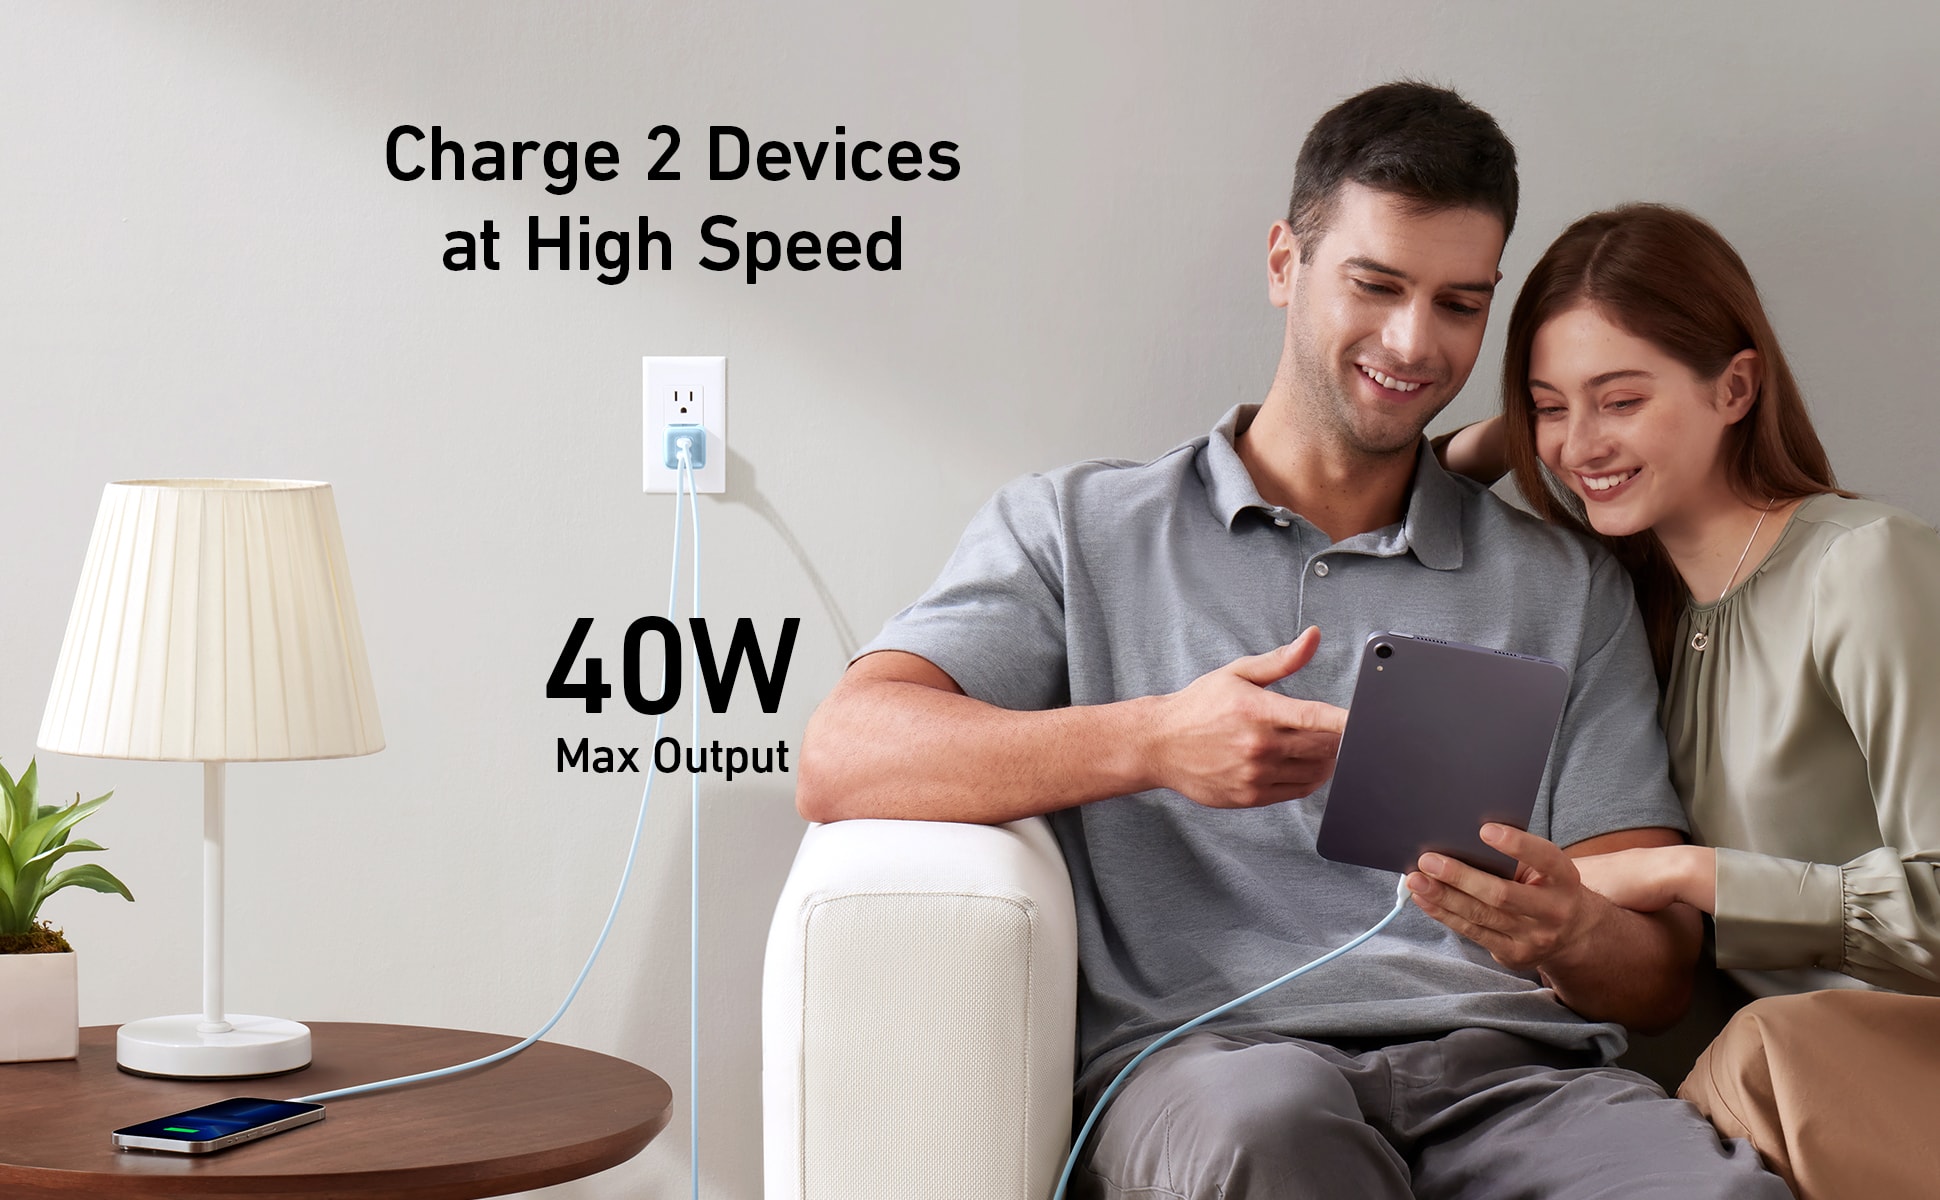 Anker A2038K11 521 | USB C Charger